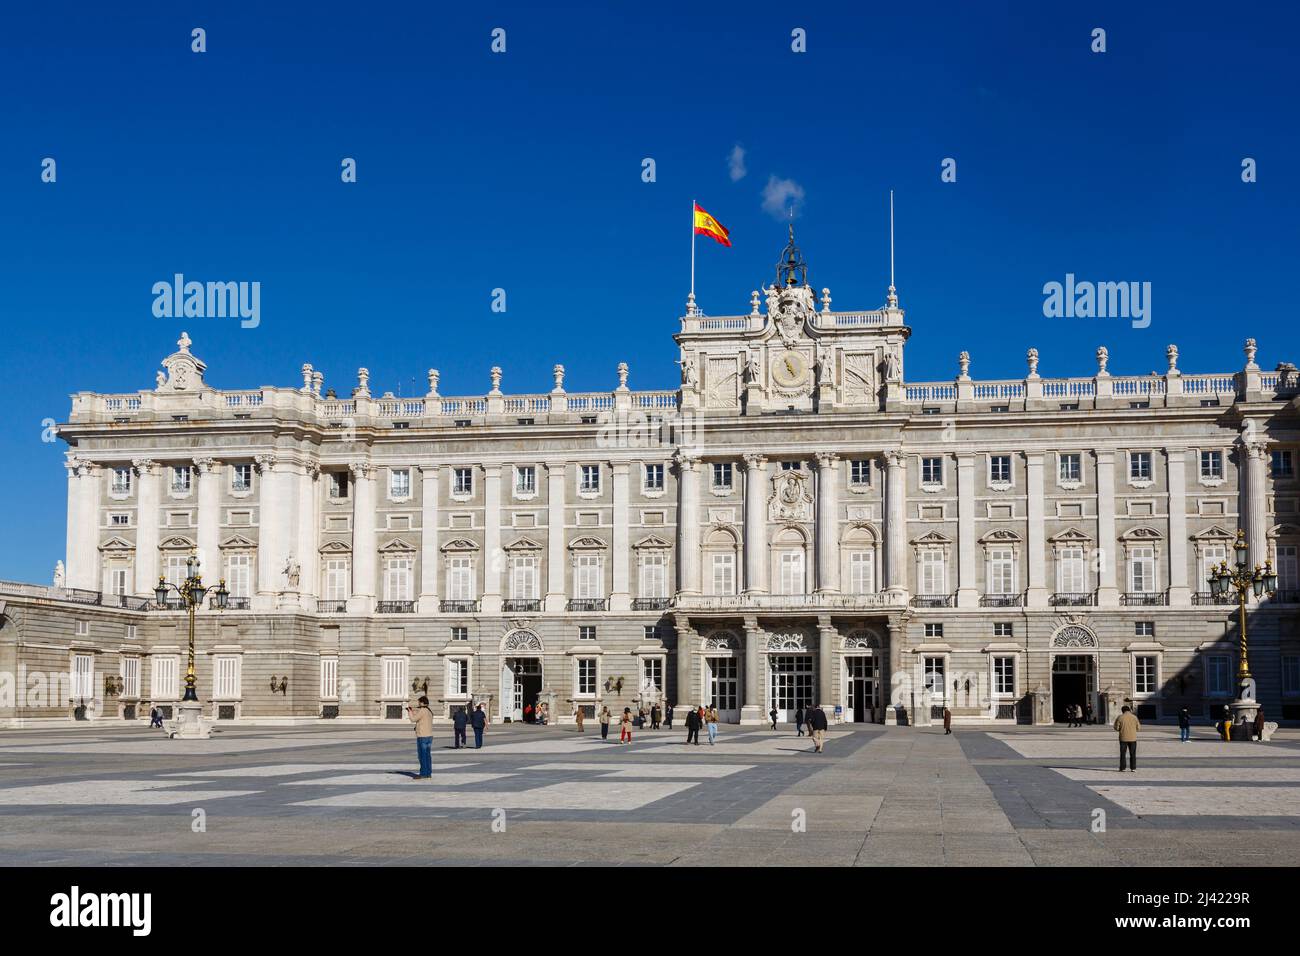 View from Plaza de la Armeria of the baroque architecture Royal Palace of Madrid (Palacio Real) in Madrid, capital city of Spain Stock Photo